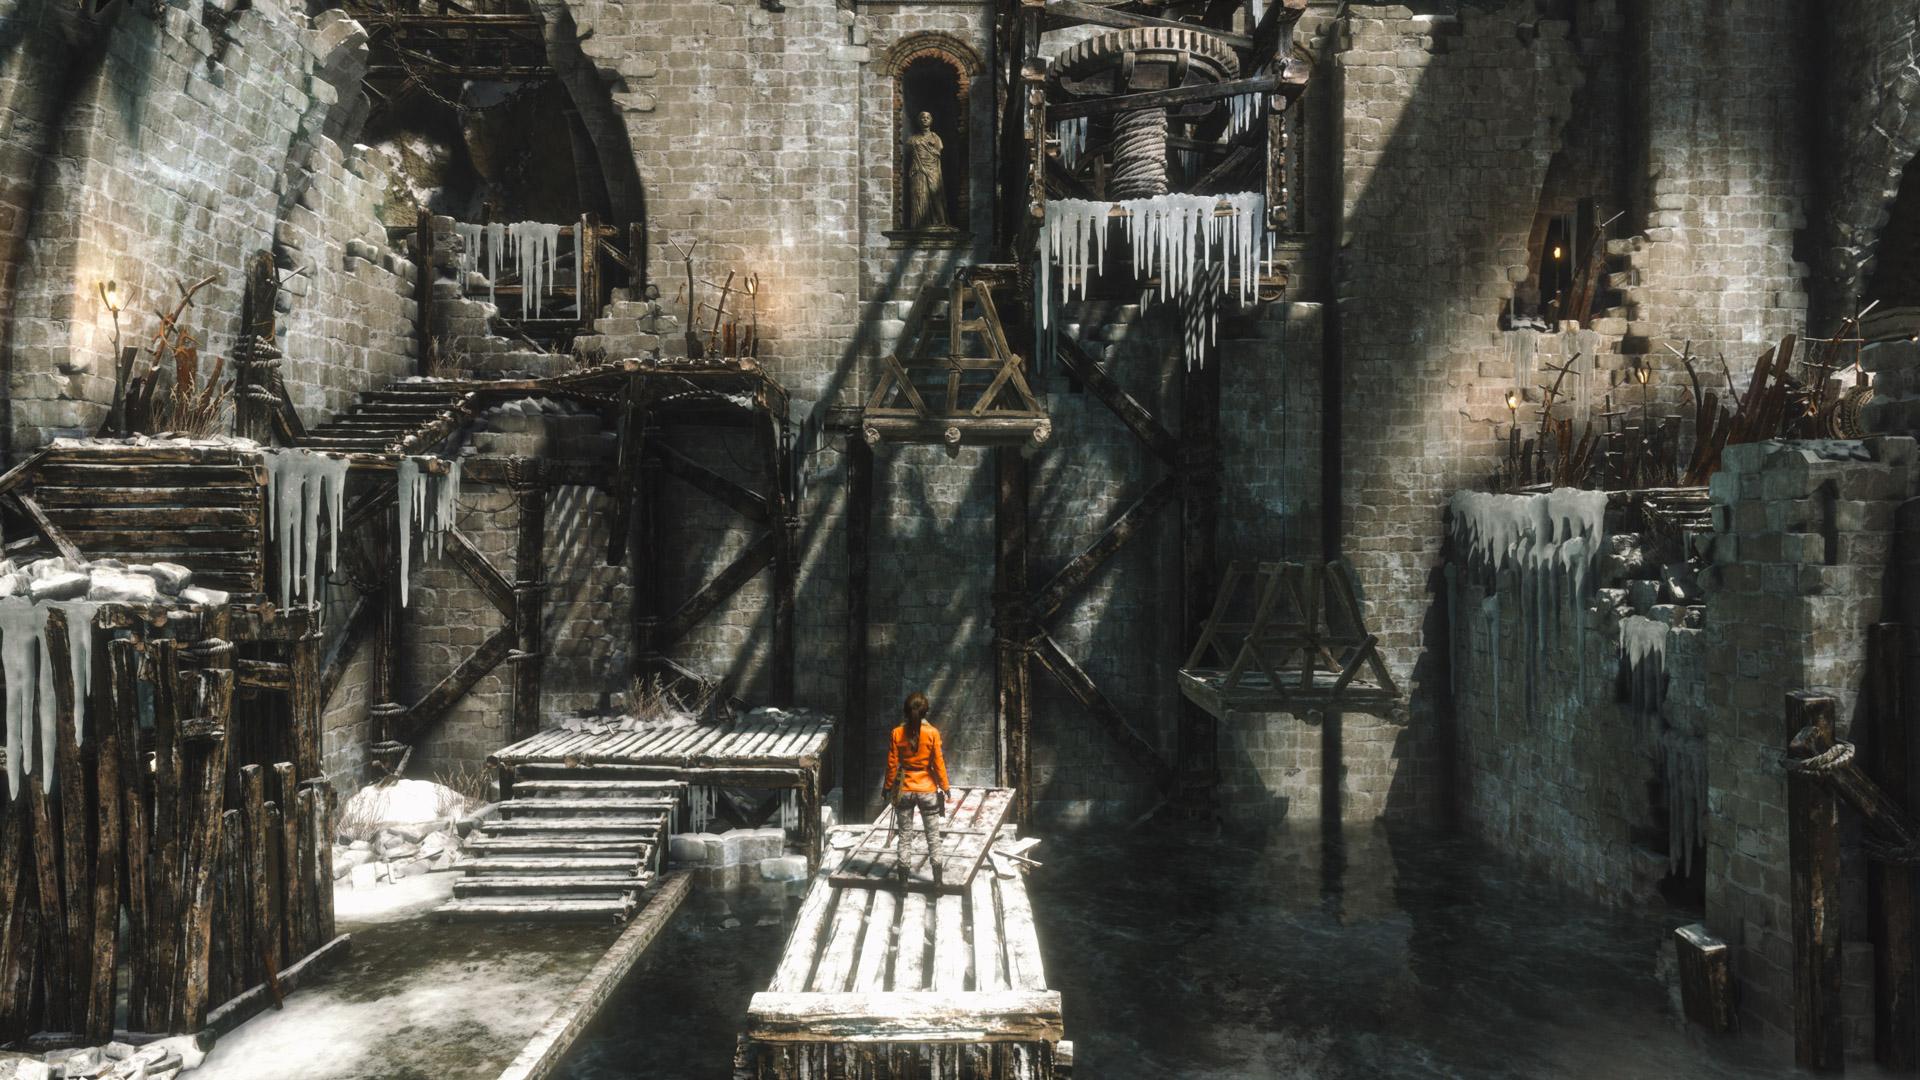 Lara Croft looking at a puzzle of ropes and pulleys in Rise of the Tomb Raider's Baba Yaga DLC.